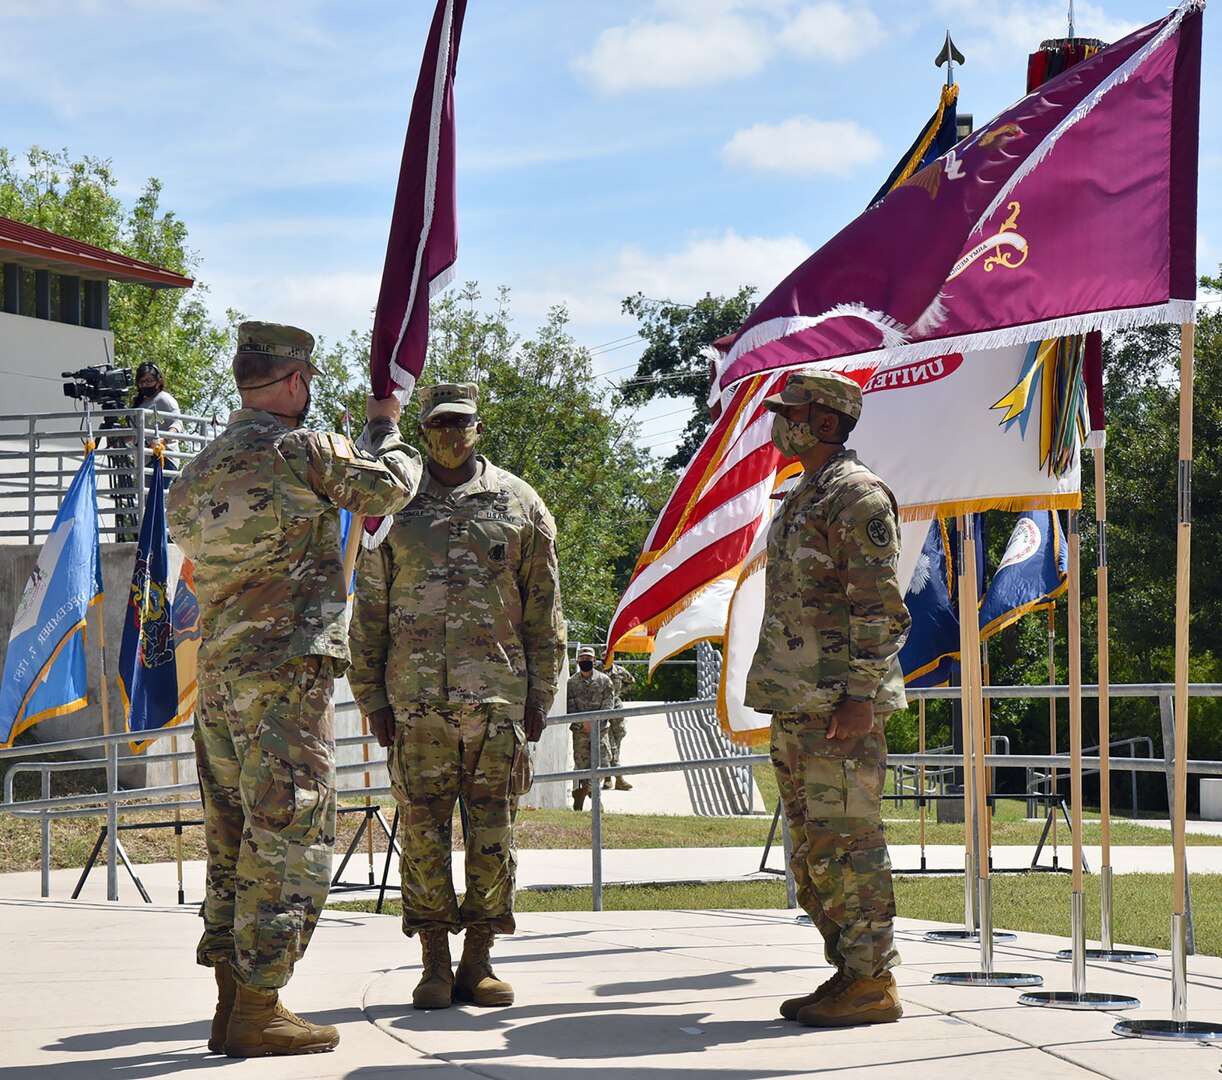 Gen. James C. McConville, Chief of Staff of the U.S. Army, passes the flag to the U.S. Army Surgeon General and commanding general, U.S. Army Medical Command, Lt. Gen. R. Scott Dingle, in an assumption of command ceremony at Joint Base San Antonio-Fort Sam Houston June 24.